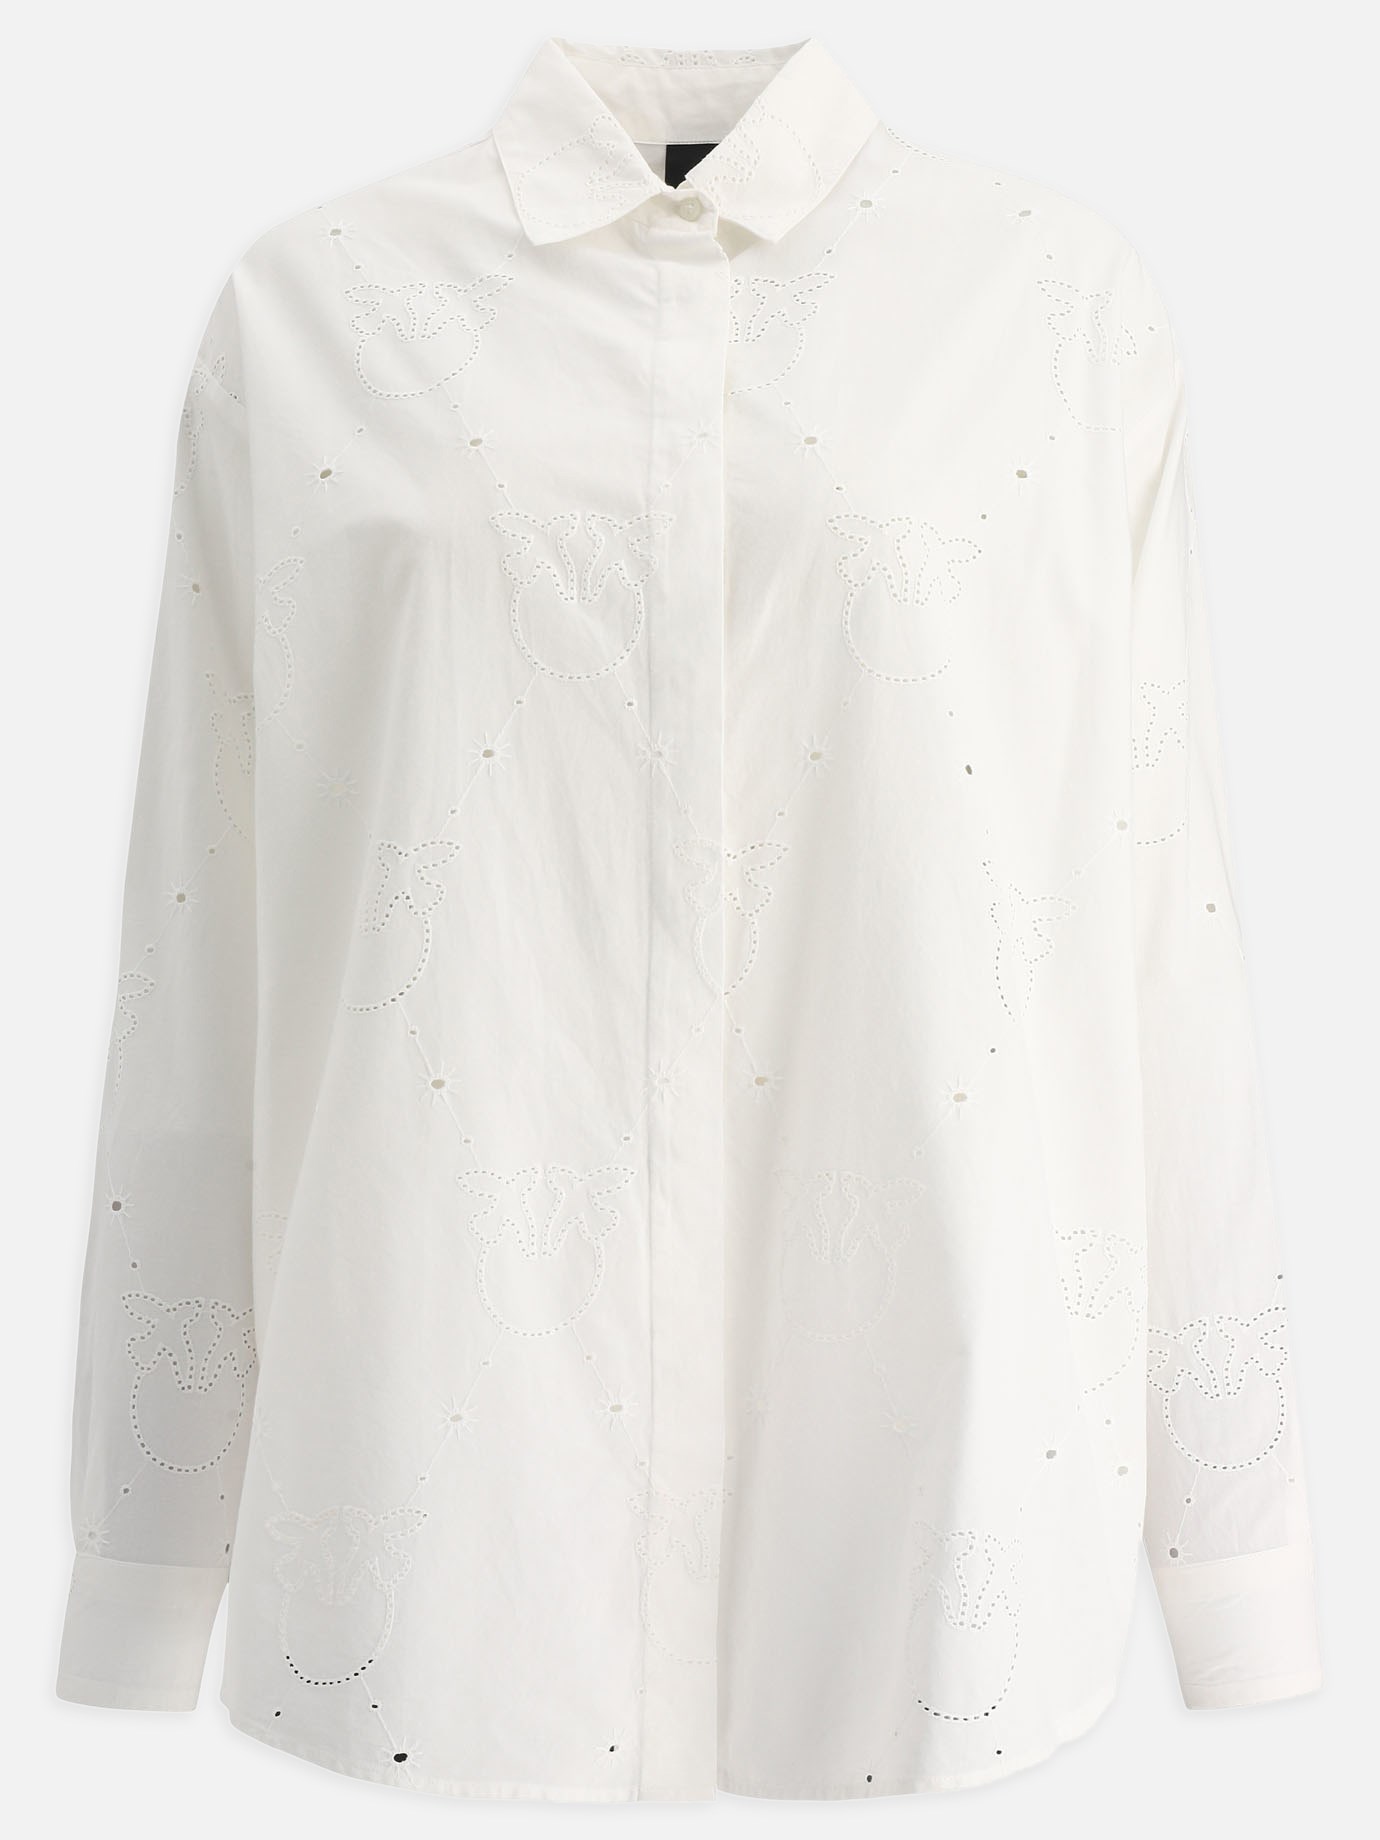  Beethoven  shirt by Pinko